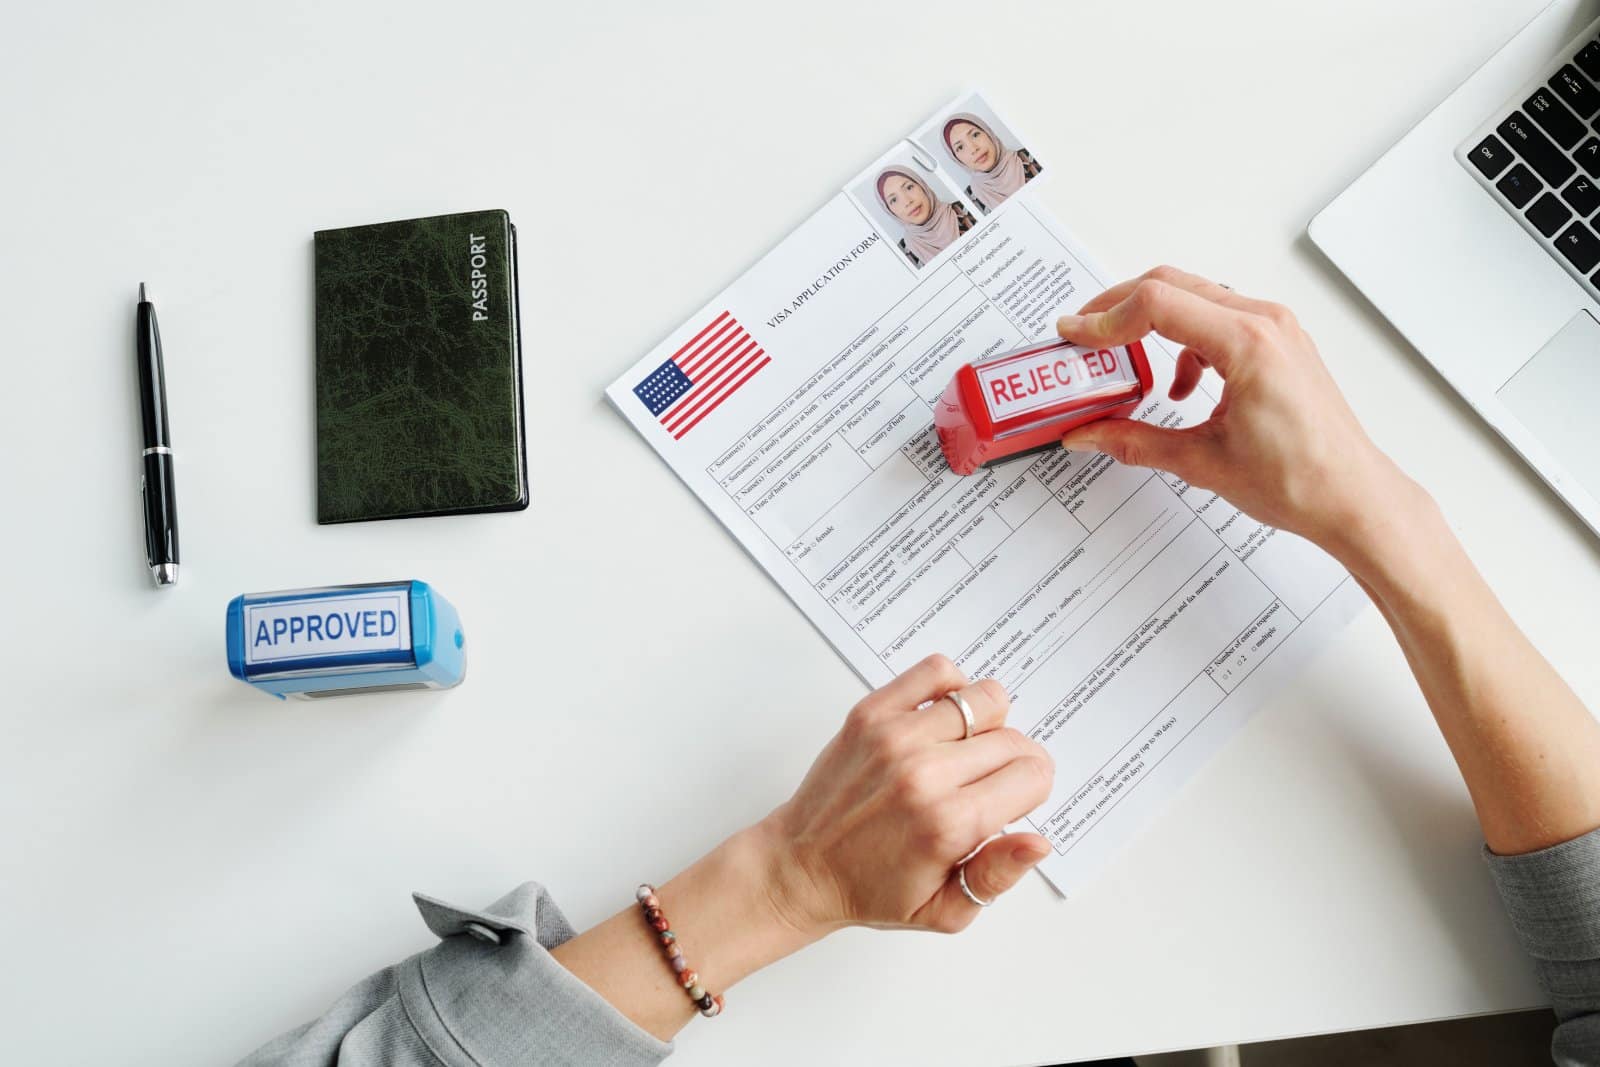 <p><span>A visa denial can be disheartening, but it’s not always the end of the road. Embassies usually provide reasons for denial, which you should address in subsequent applications. Some countries offer an appeal process, while others require you to wait a certain period before reapplying.</span></p> <p><span>Understanding the specific protocol of the country you’re applying to is crucial. Ensure your reapplication or appeal addresses all the concerns raised initially. Sometimes, seeking the assistance of a visa consultant or an immigration lawyer can provide clarity and improve your chances in complex cases.</span></p> <p><b>Insider’s Tip: </b><span>In case of a visa denial, understand the reasons provided and the process for an appeal or reapplication, if applicable.</span></p>